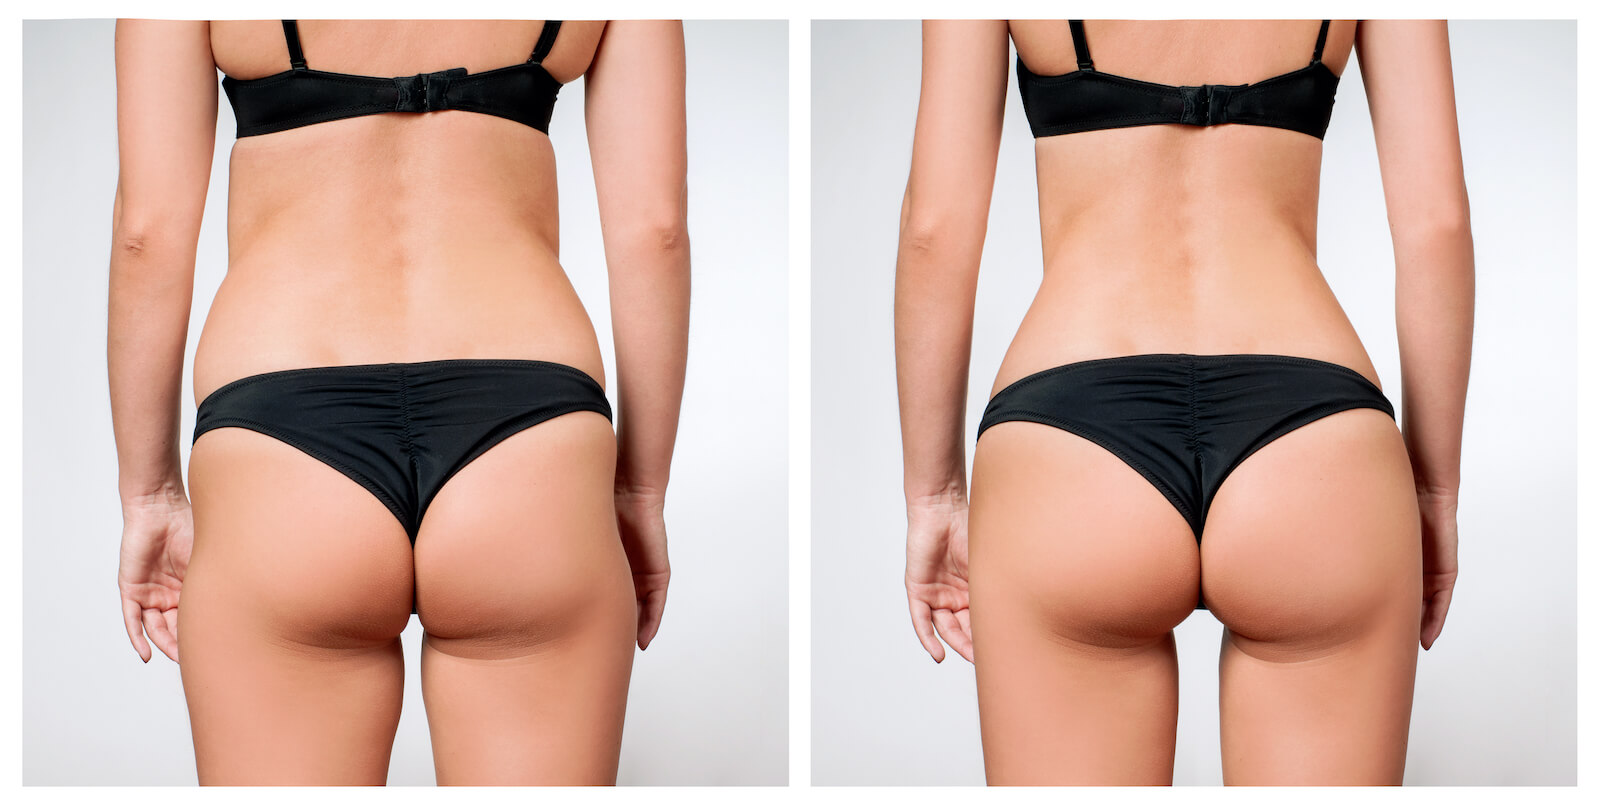 Liposuction Before and After Photo of Woman's Back, Butt, and Legs